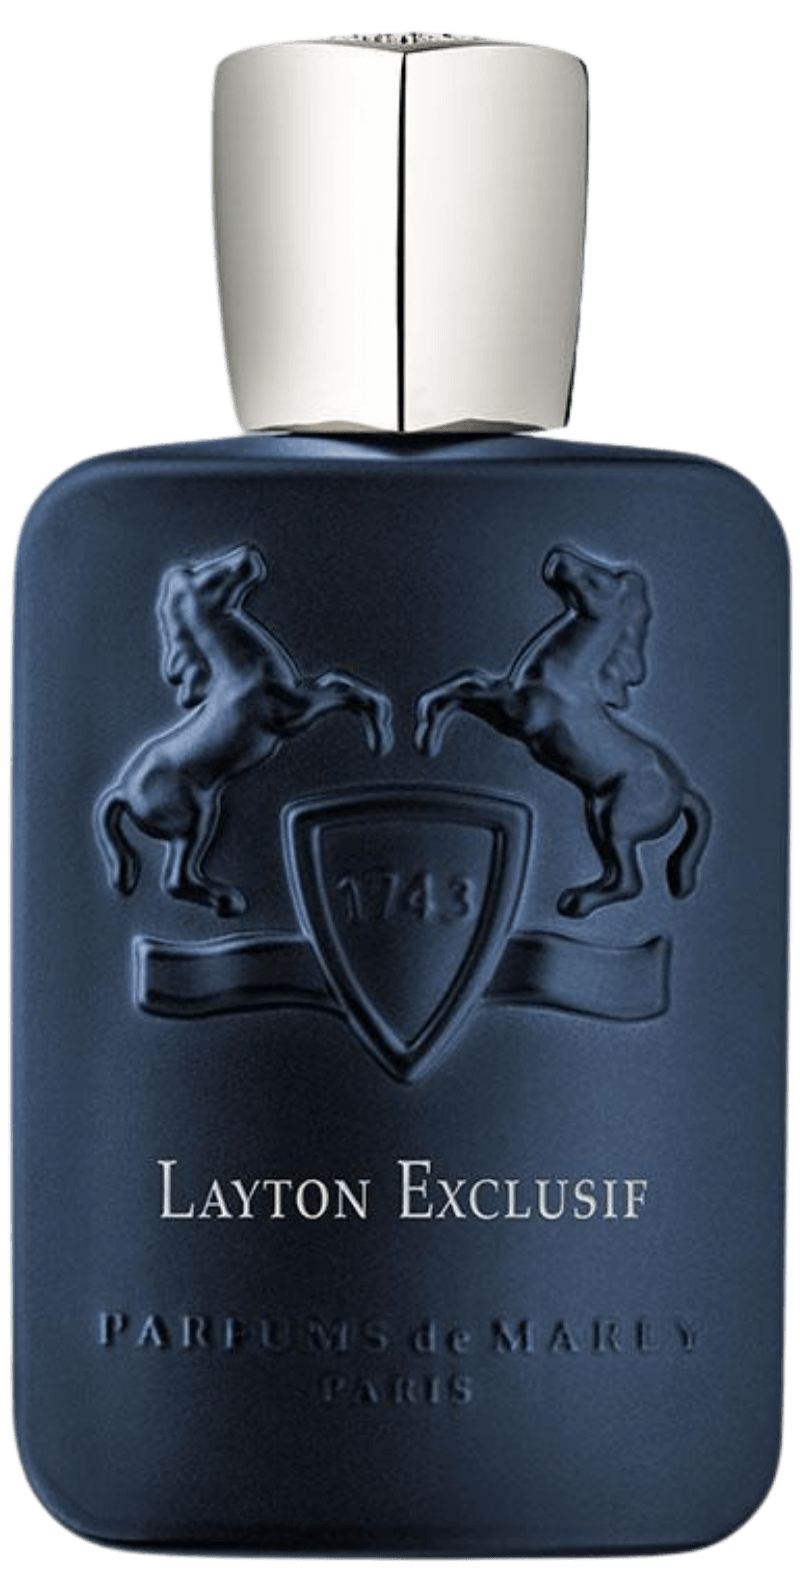 &#39;s Parfums de Marly Layton Exclusif - Bellini&#39;s Skin and Parfumerie 